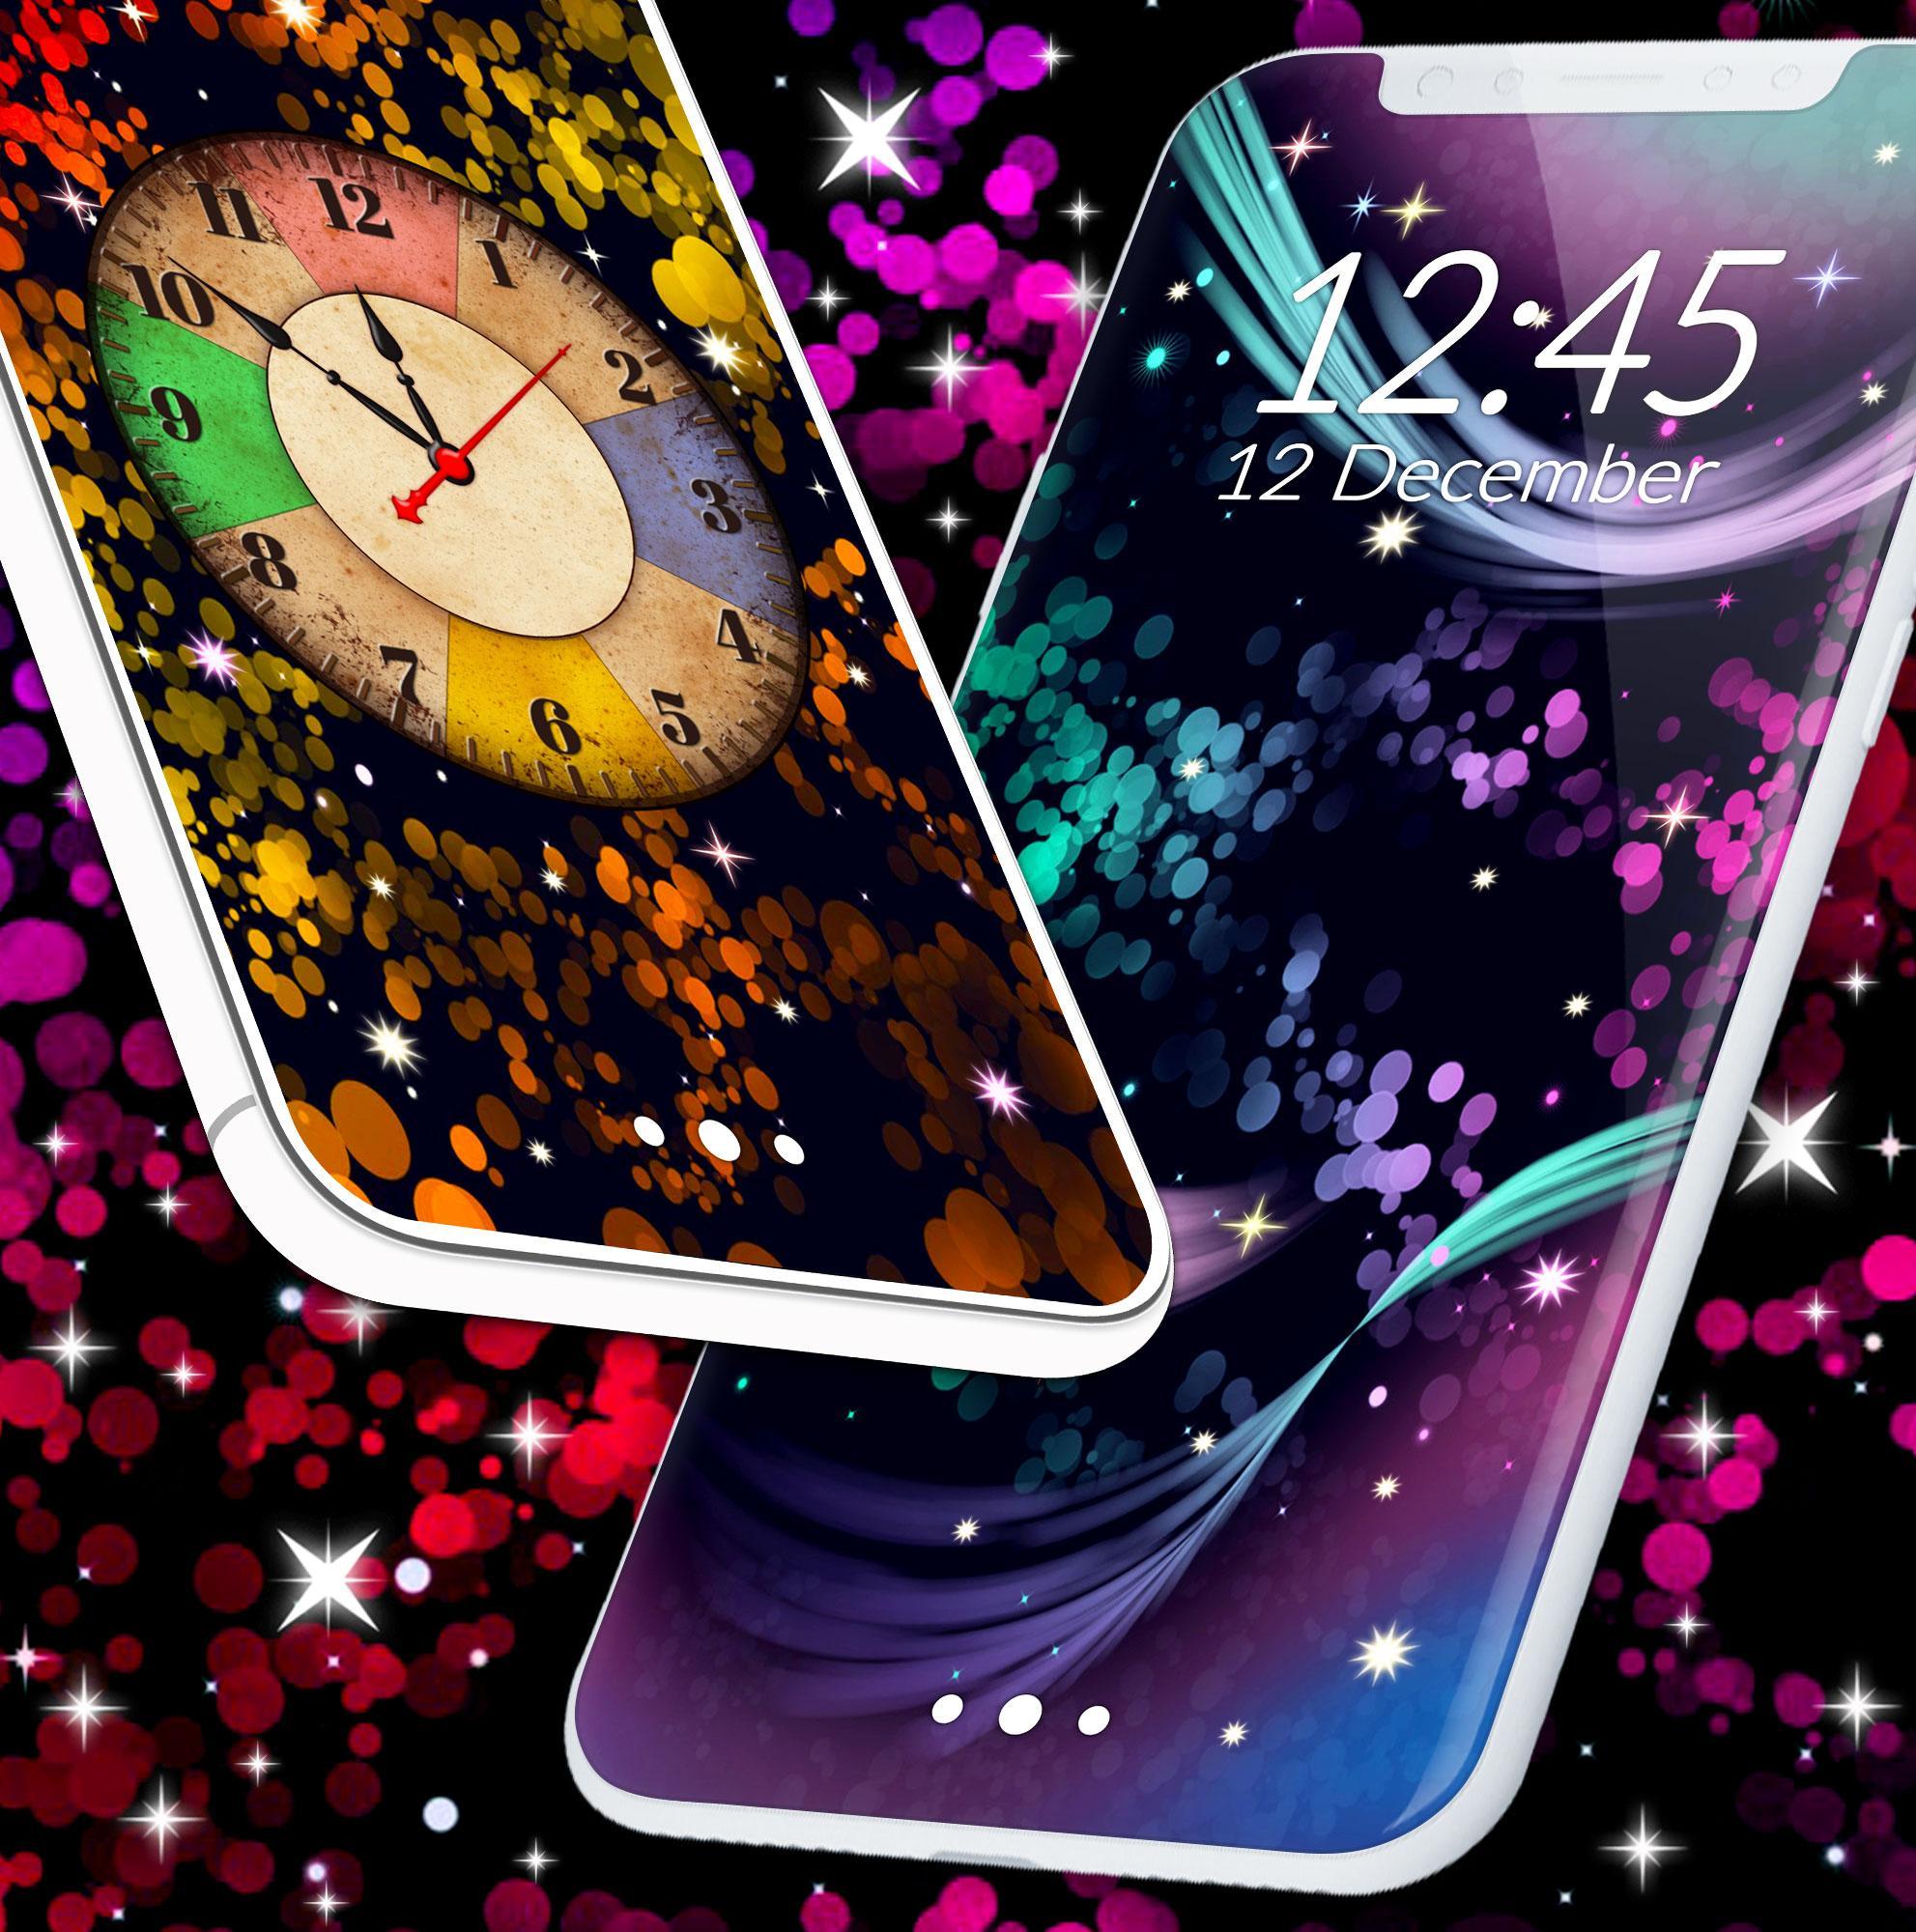 Free Live Wallpaper for Xperia ❤️ Best Wallpapers 6.7.7 Screenshot 1